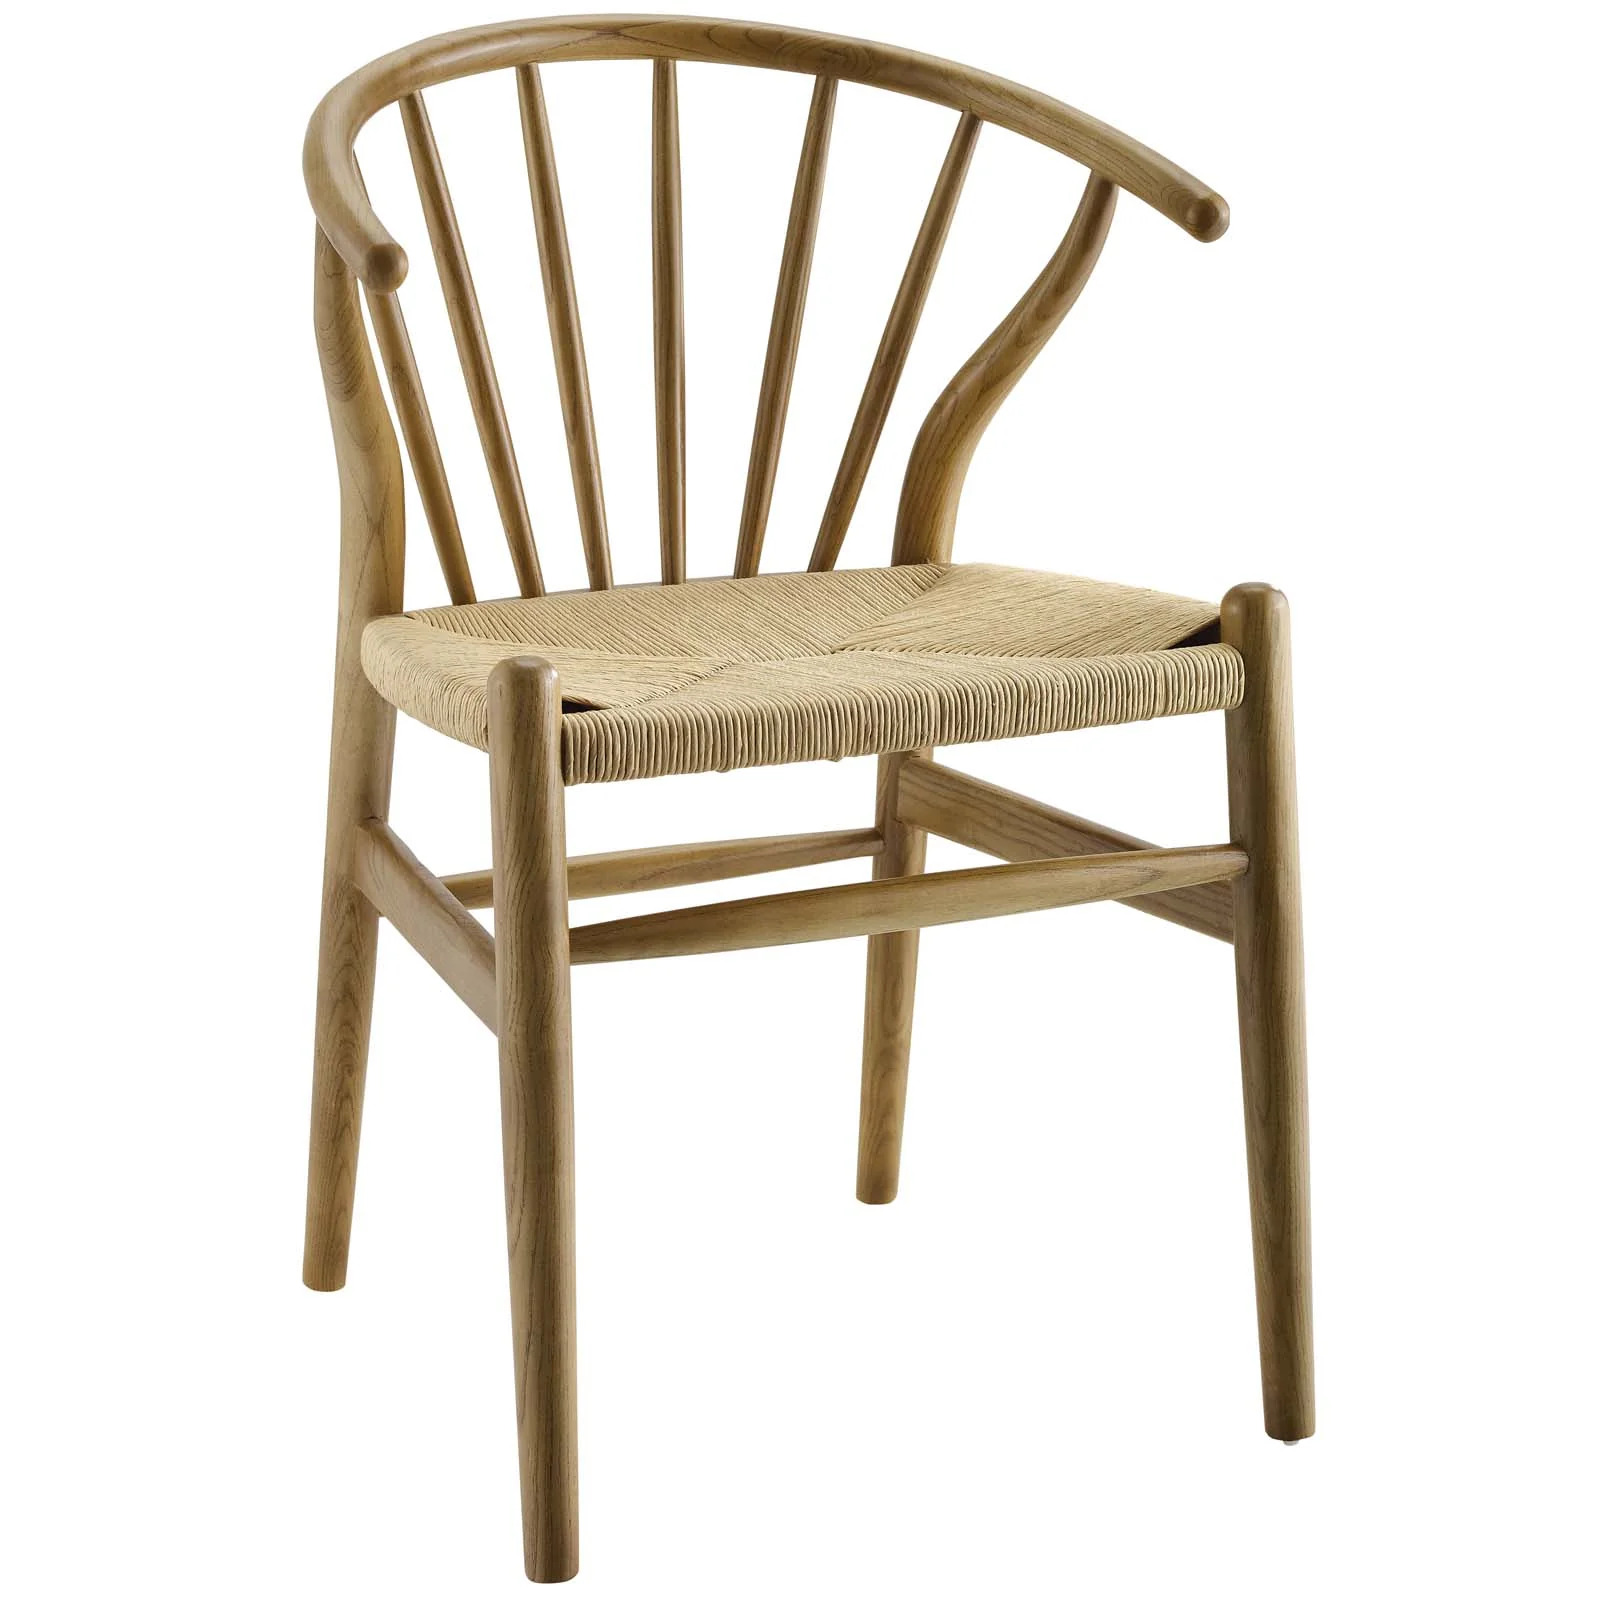 Modway Flourish Spindle Wood Dining Side Chair Set of 2 in Natural - image 2 of 4